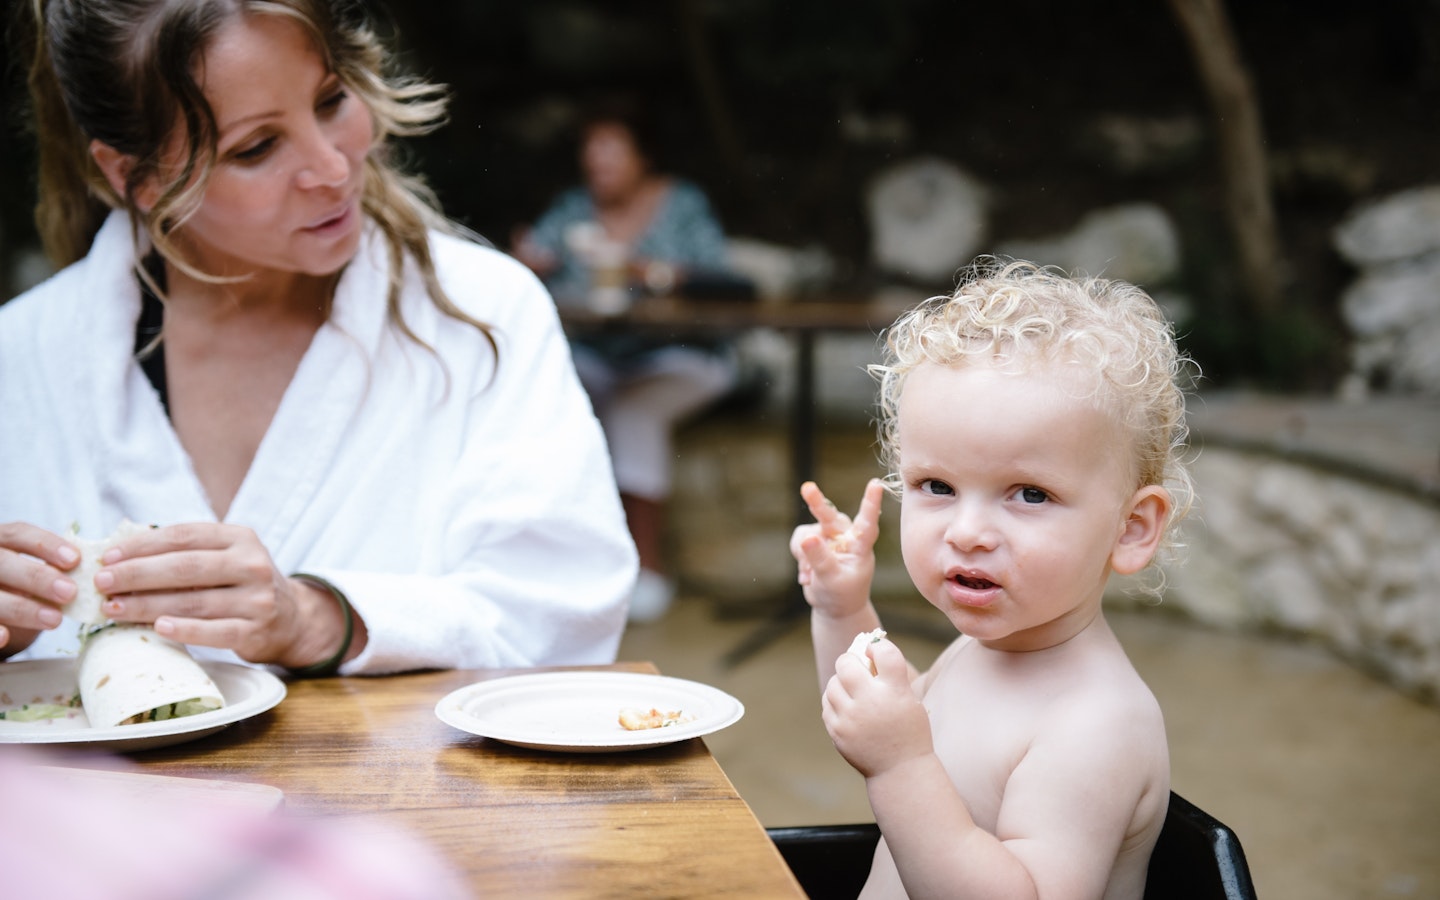 woman and baby enjoying something to eat together